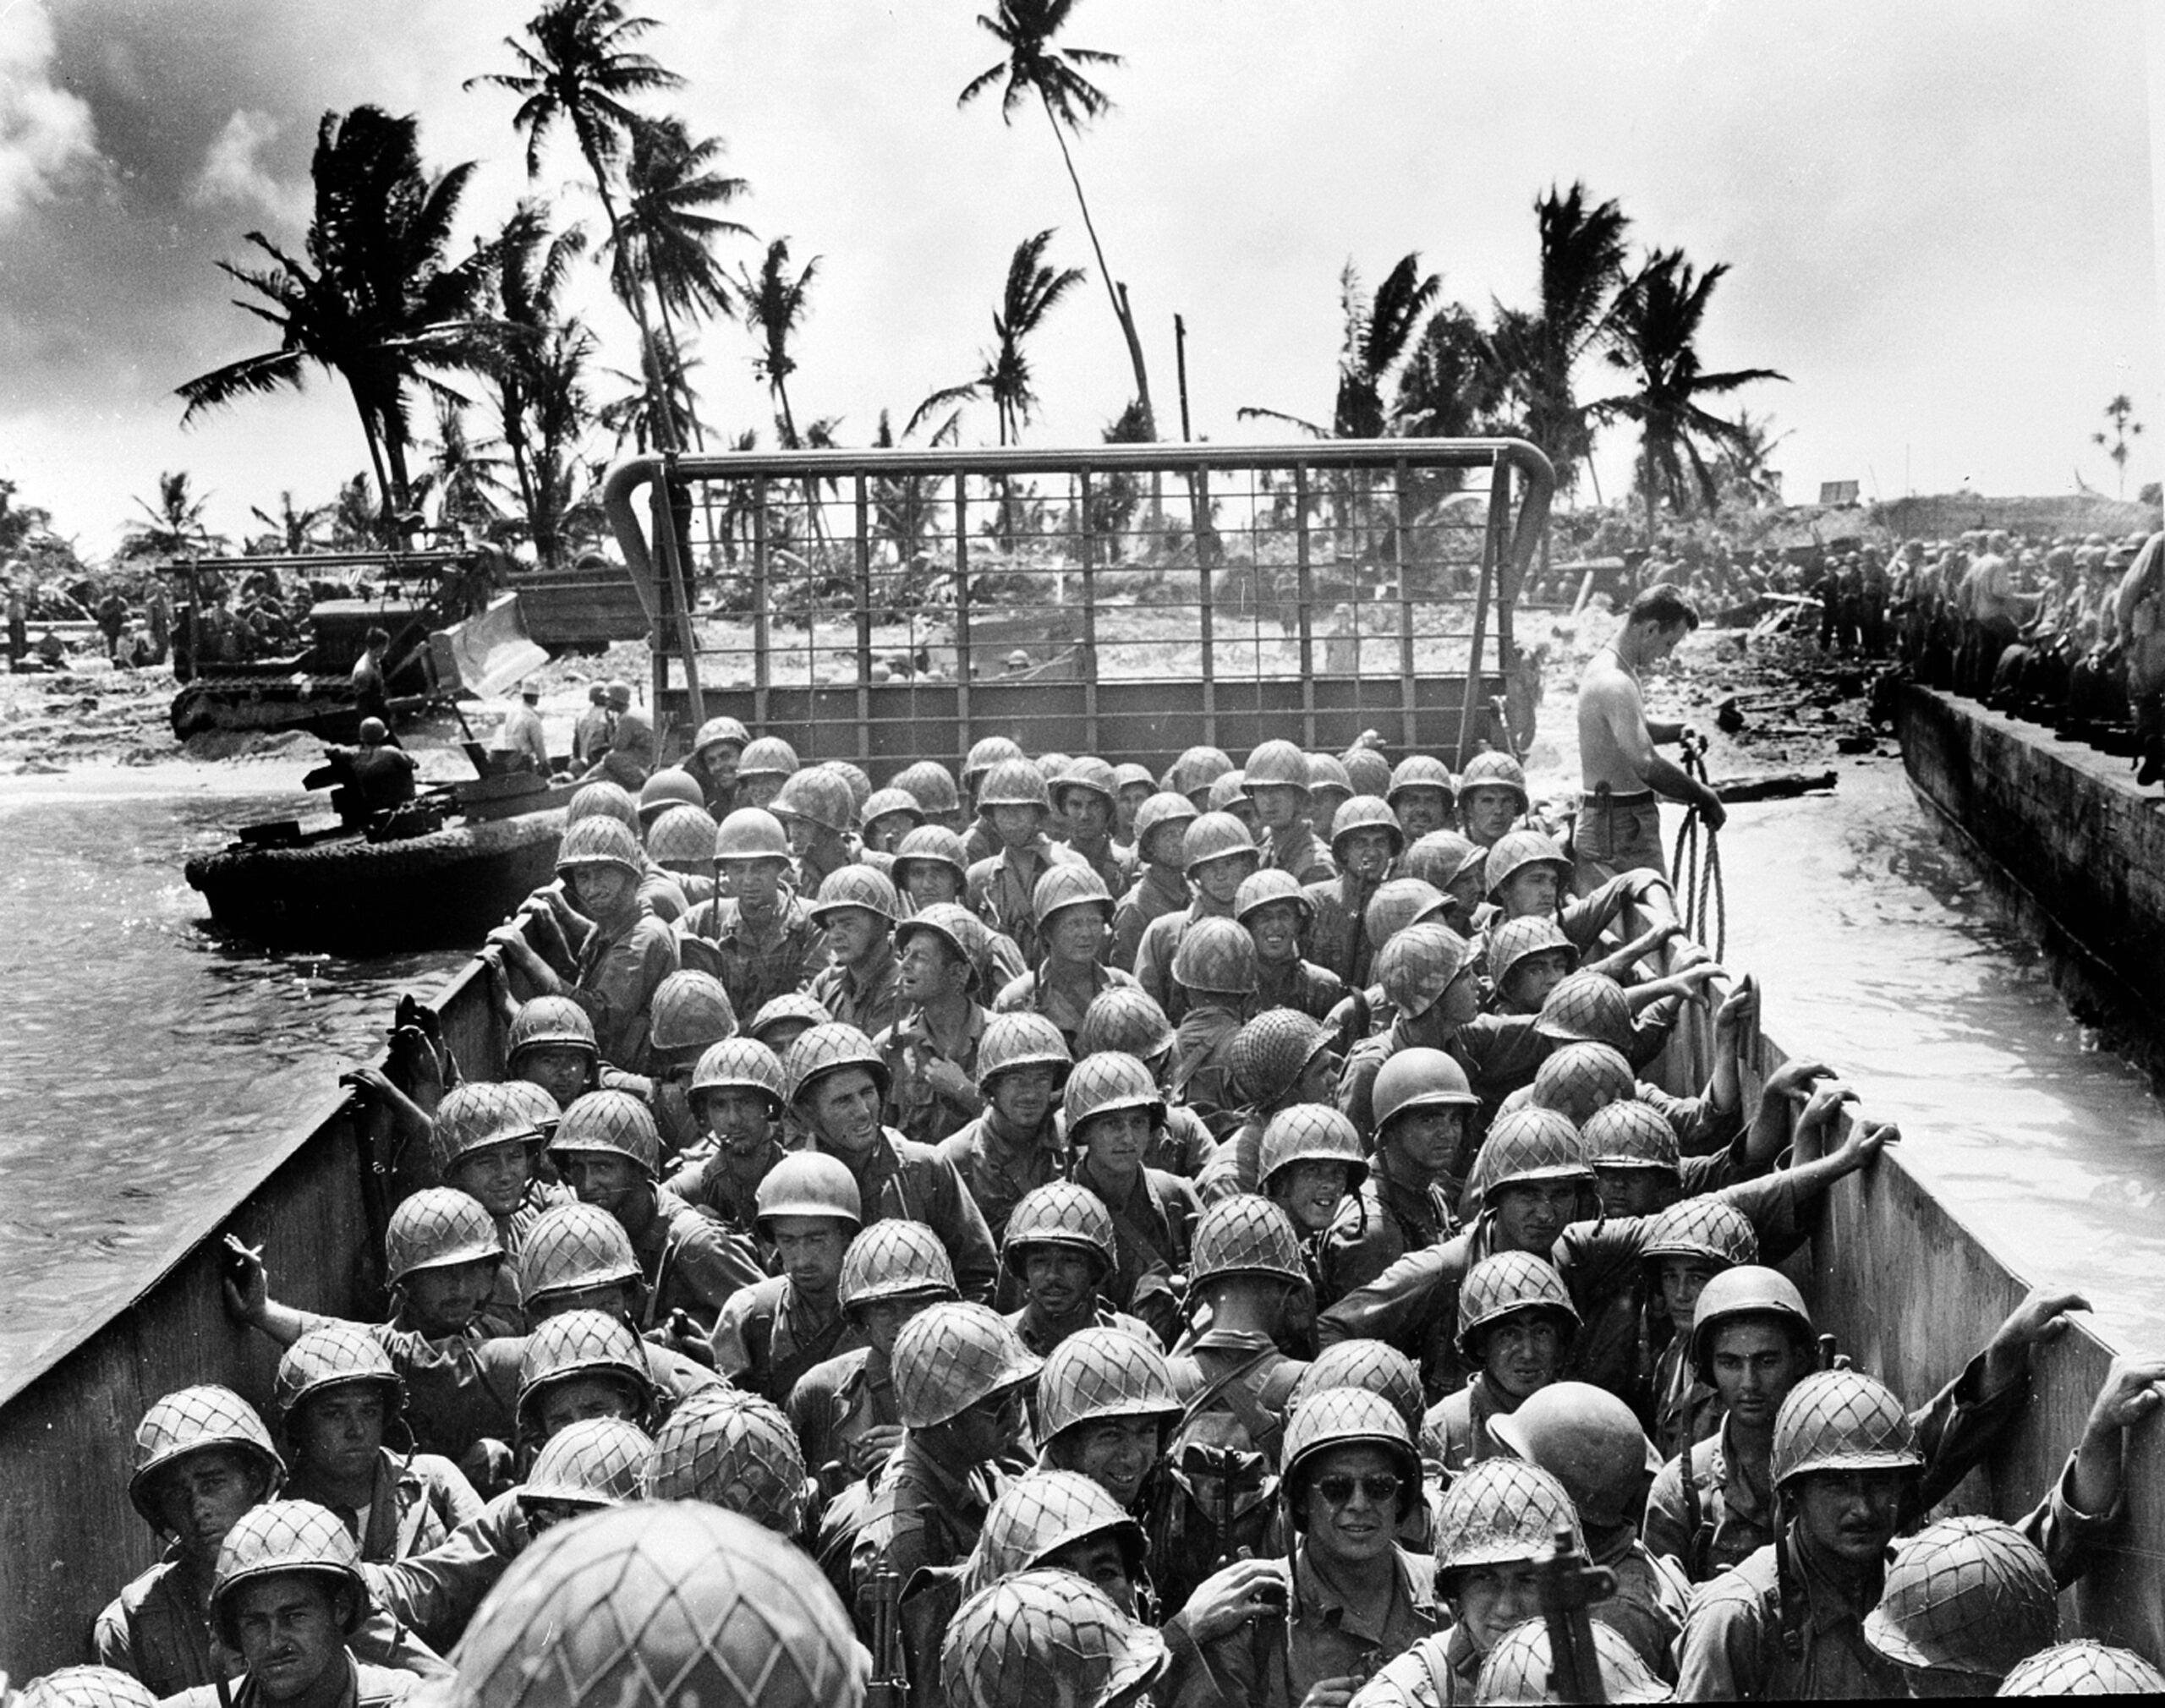 A landing craft packed with helmeted U.S. Marines, accompanied by U.S. Coast Guard, approaches the shore of an island in the Kwajalein Atoll during the American invasion of the Marshall Islands in the Pacific on March 2, 1944 during World War II.  (AP Photo/U.S. Coast Guard)